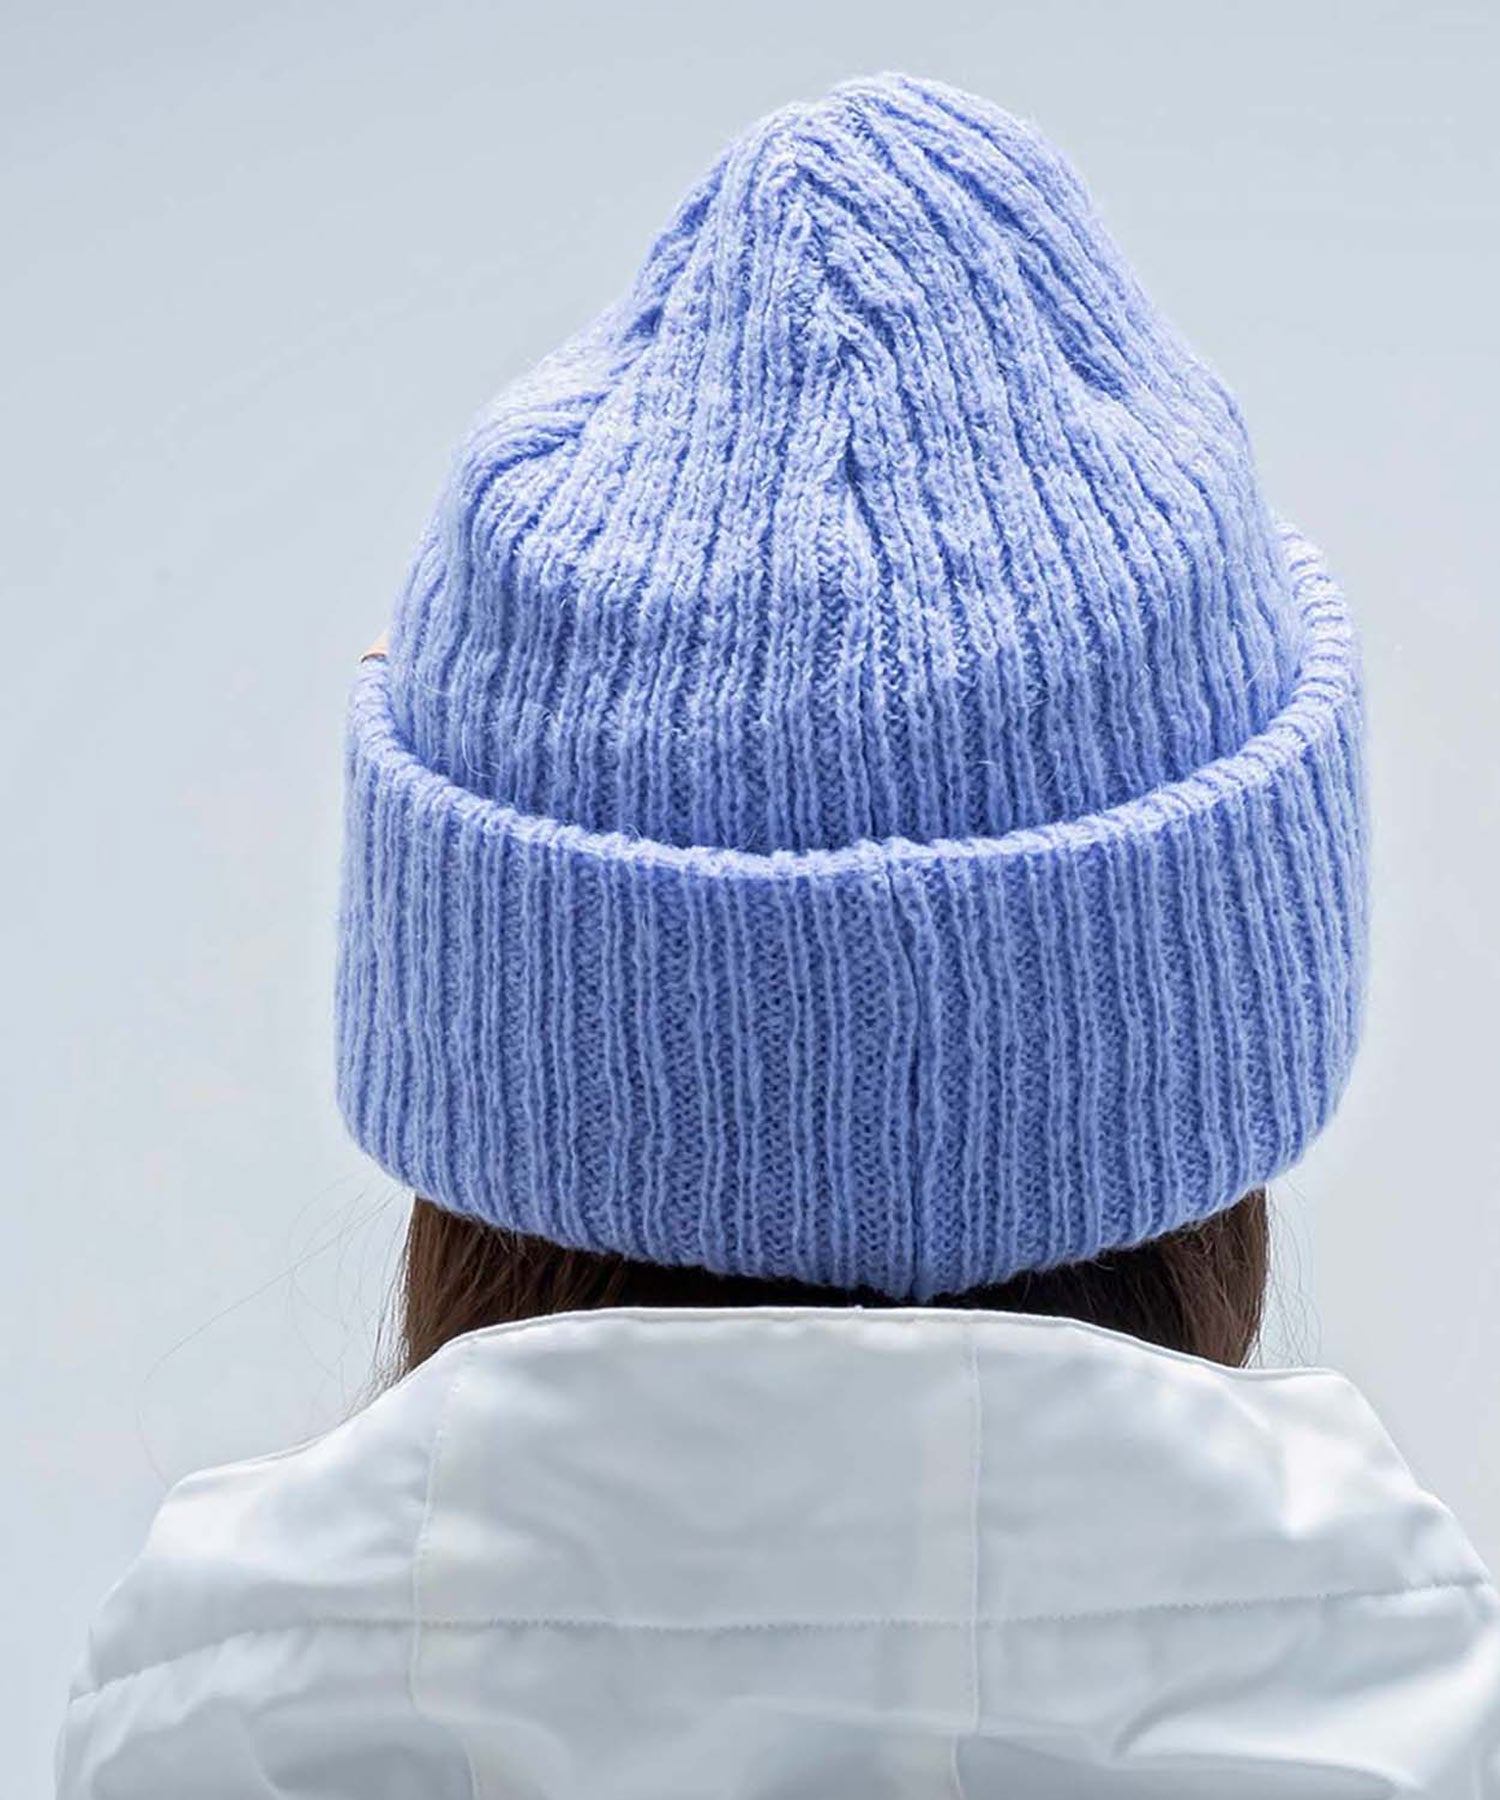 WOMENS】スキーウェア ニットキャップ Super Space-Time Knit Hat 